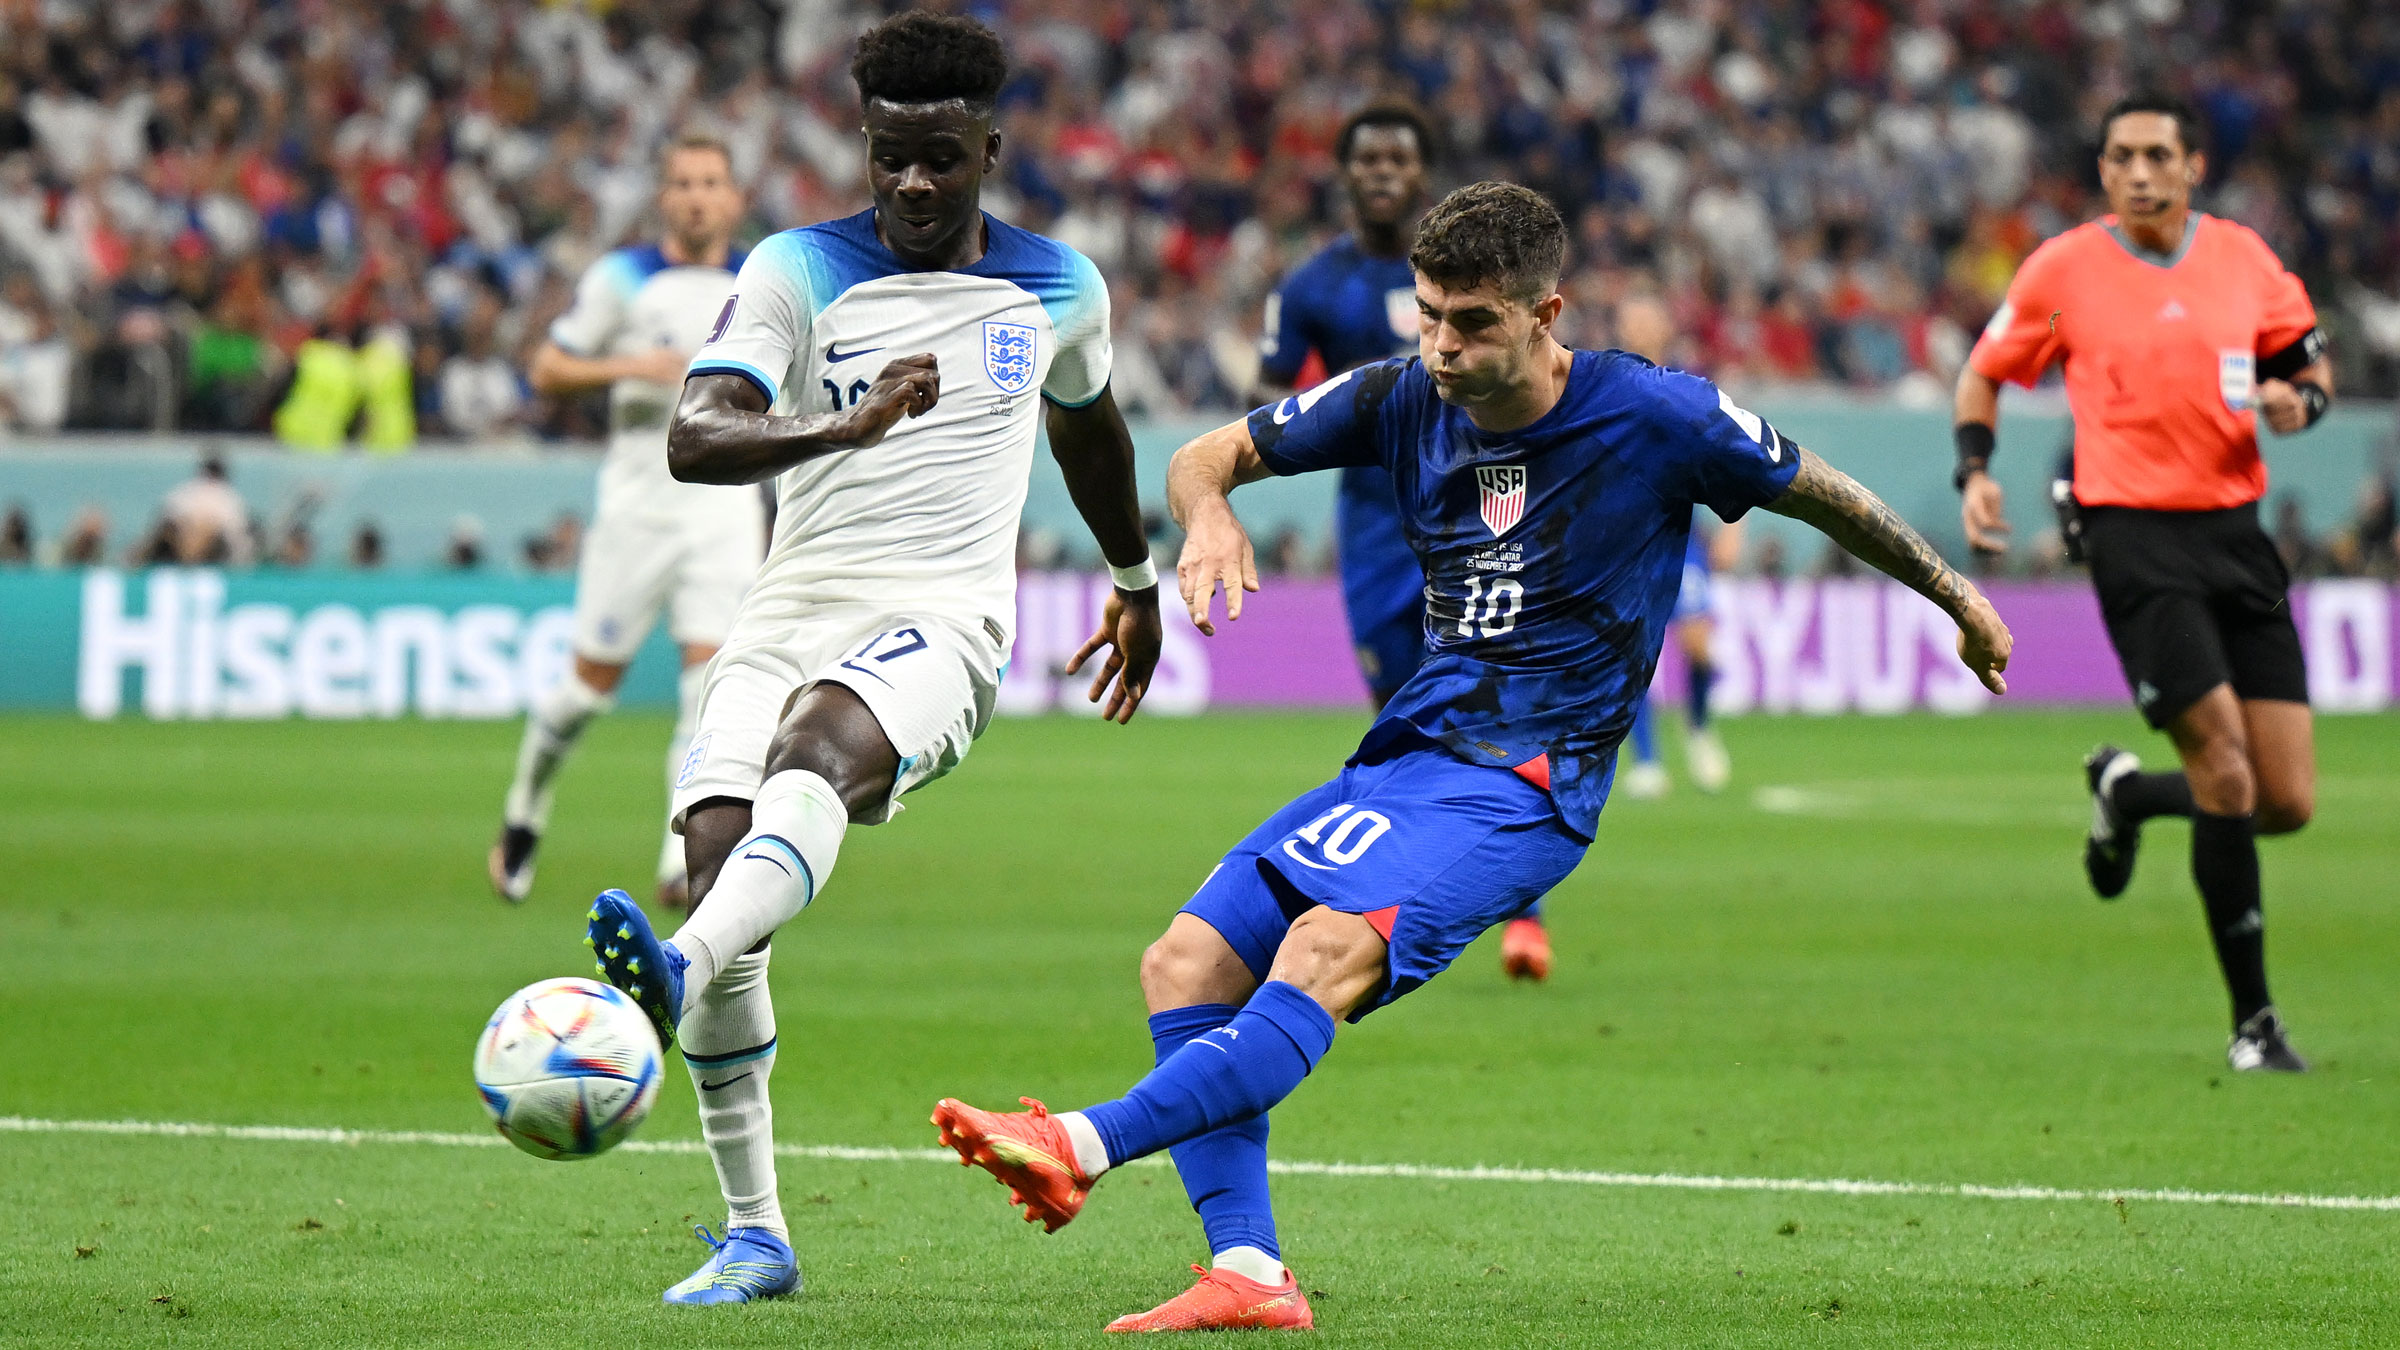 US star Christian Pulisic takes a shot in the first half that smacked off the crossbar against England.